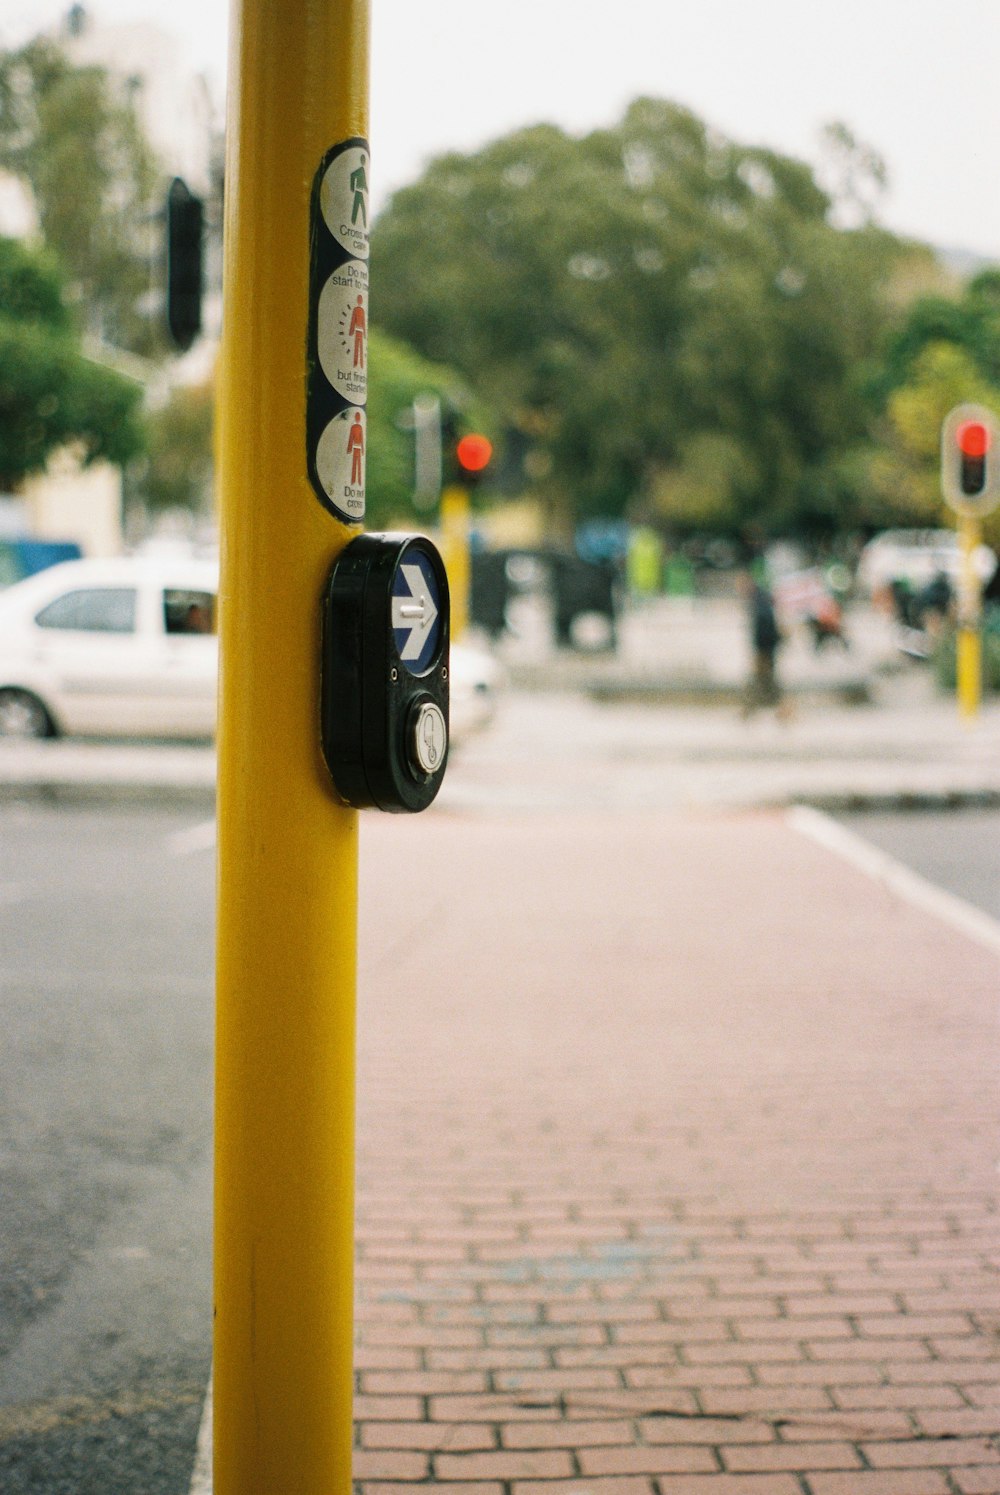 a yellow pole with a button on it on a city street